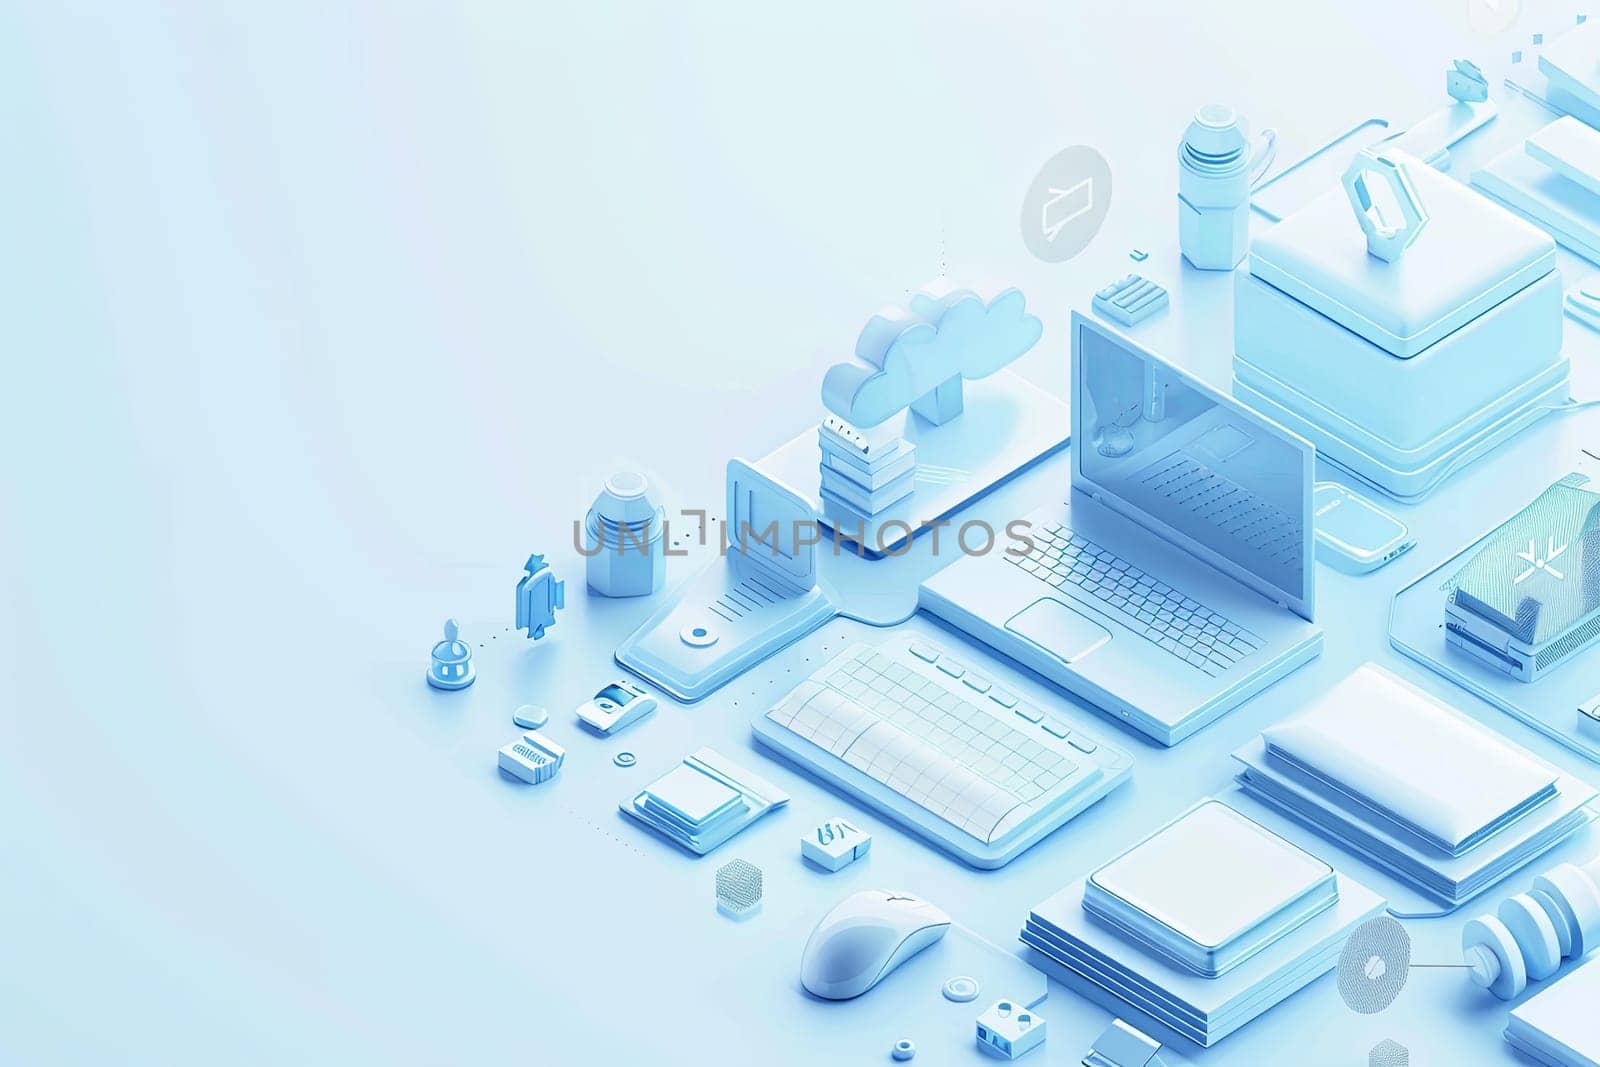 Isometric icon of computers, laptops, liaisons, and technology equipment in white and blue colors for computer service or tech repair banner.